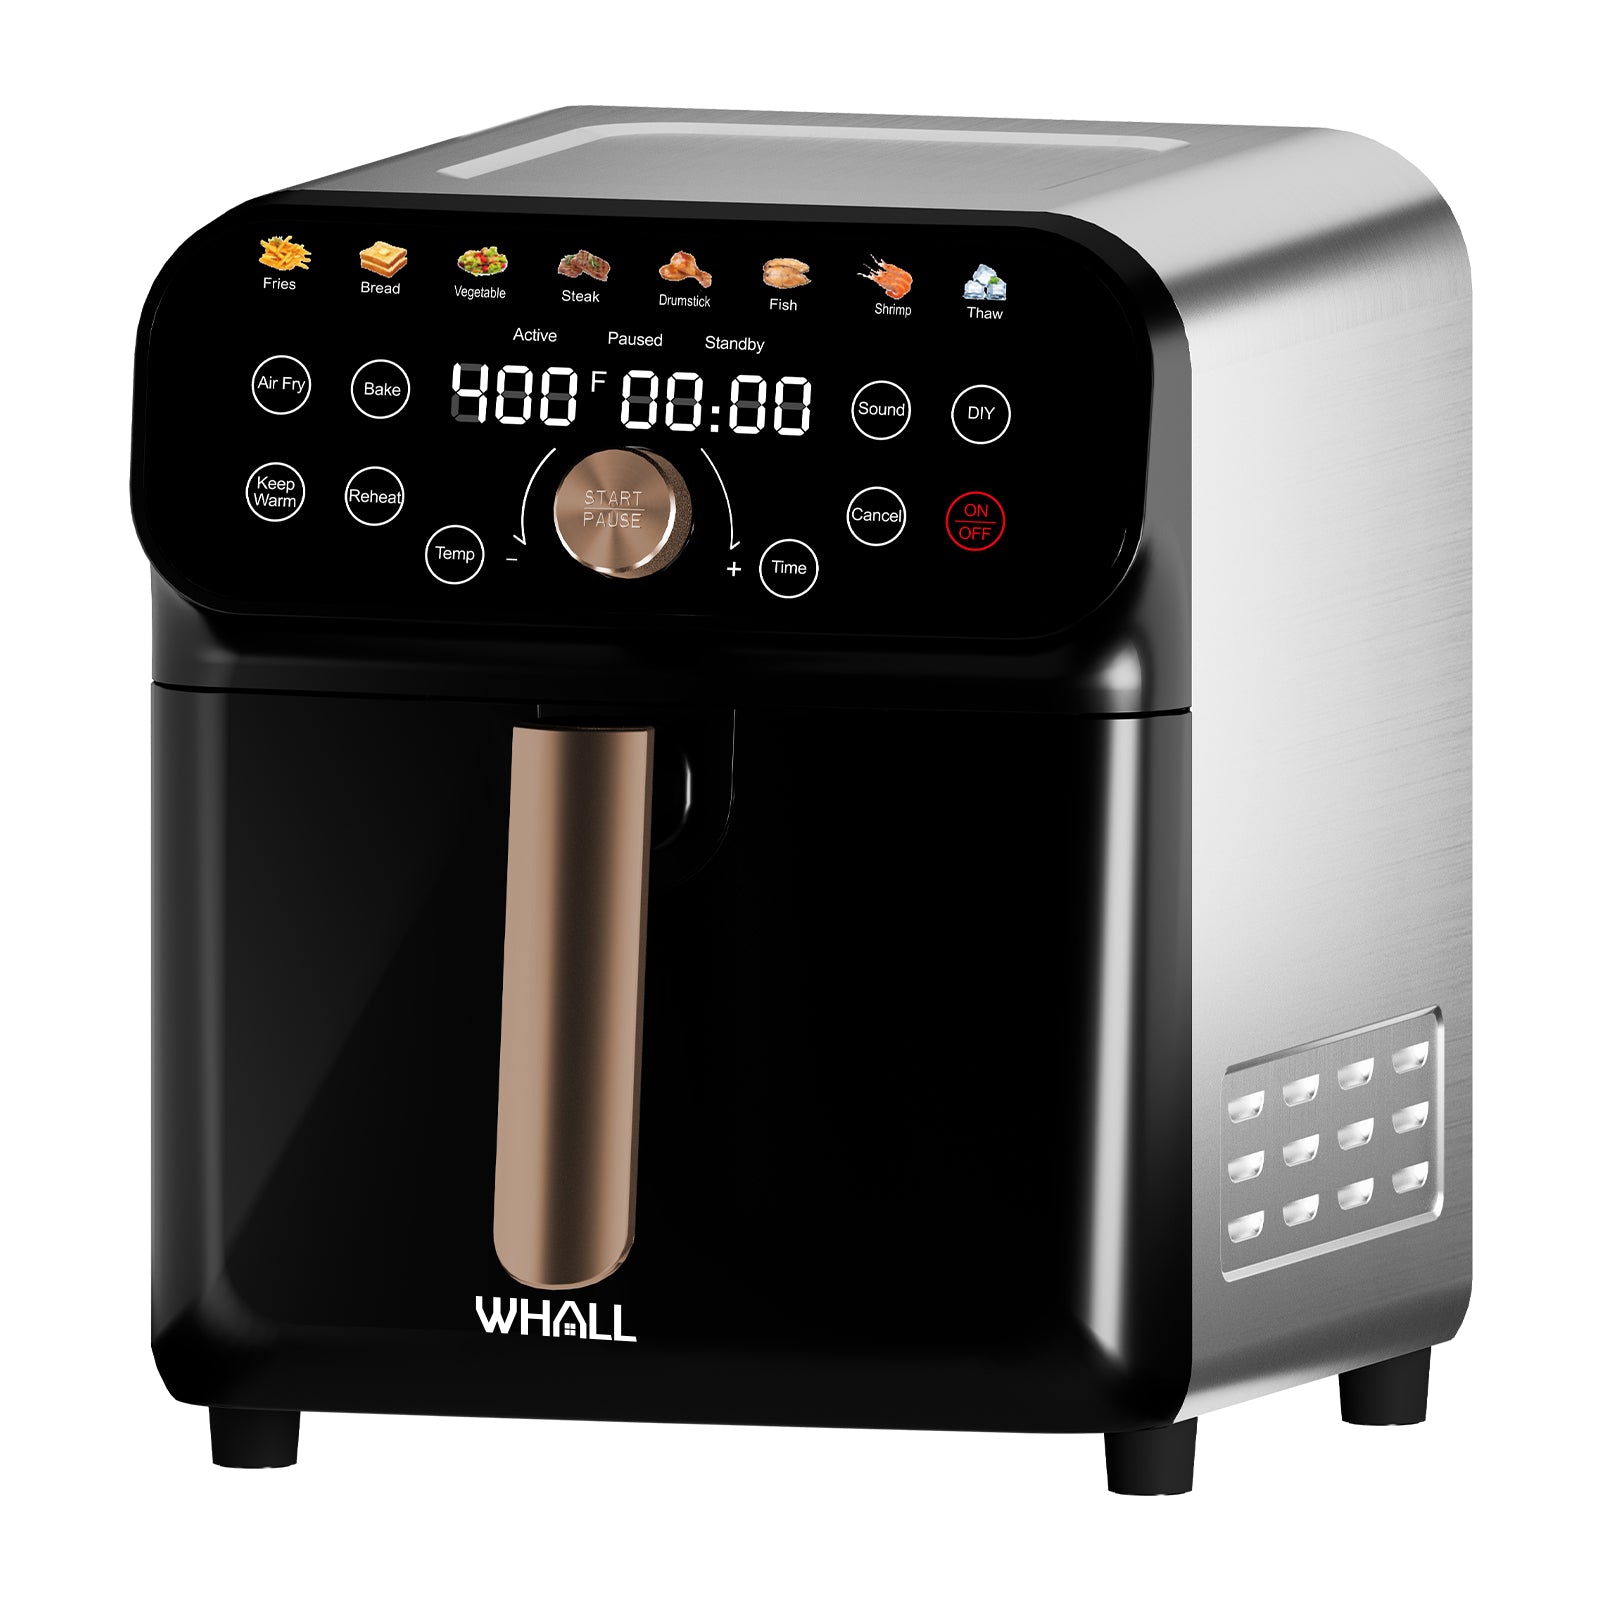 WHALL® Air Fryer, 6.3Qt Air Fryer Oven with LED Digital Touchscreen, Custom Presets, Nonstick and Dishwasher-Safe Basket, Stainless Steel/1600W